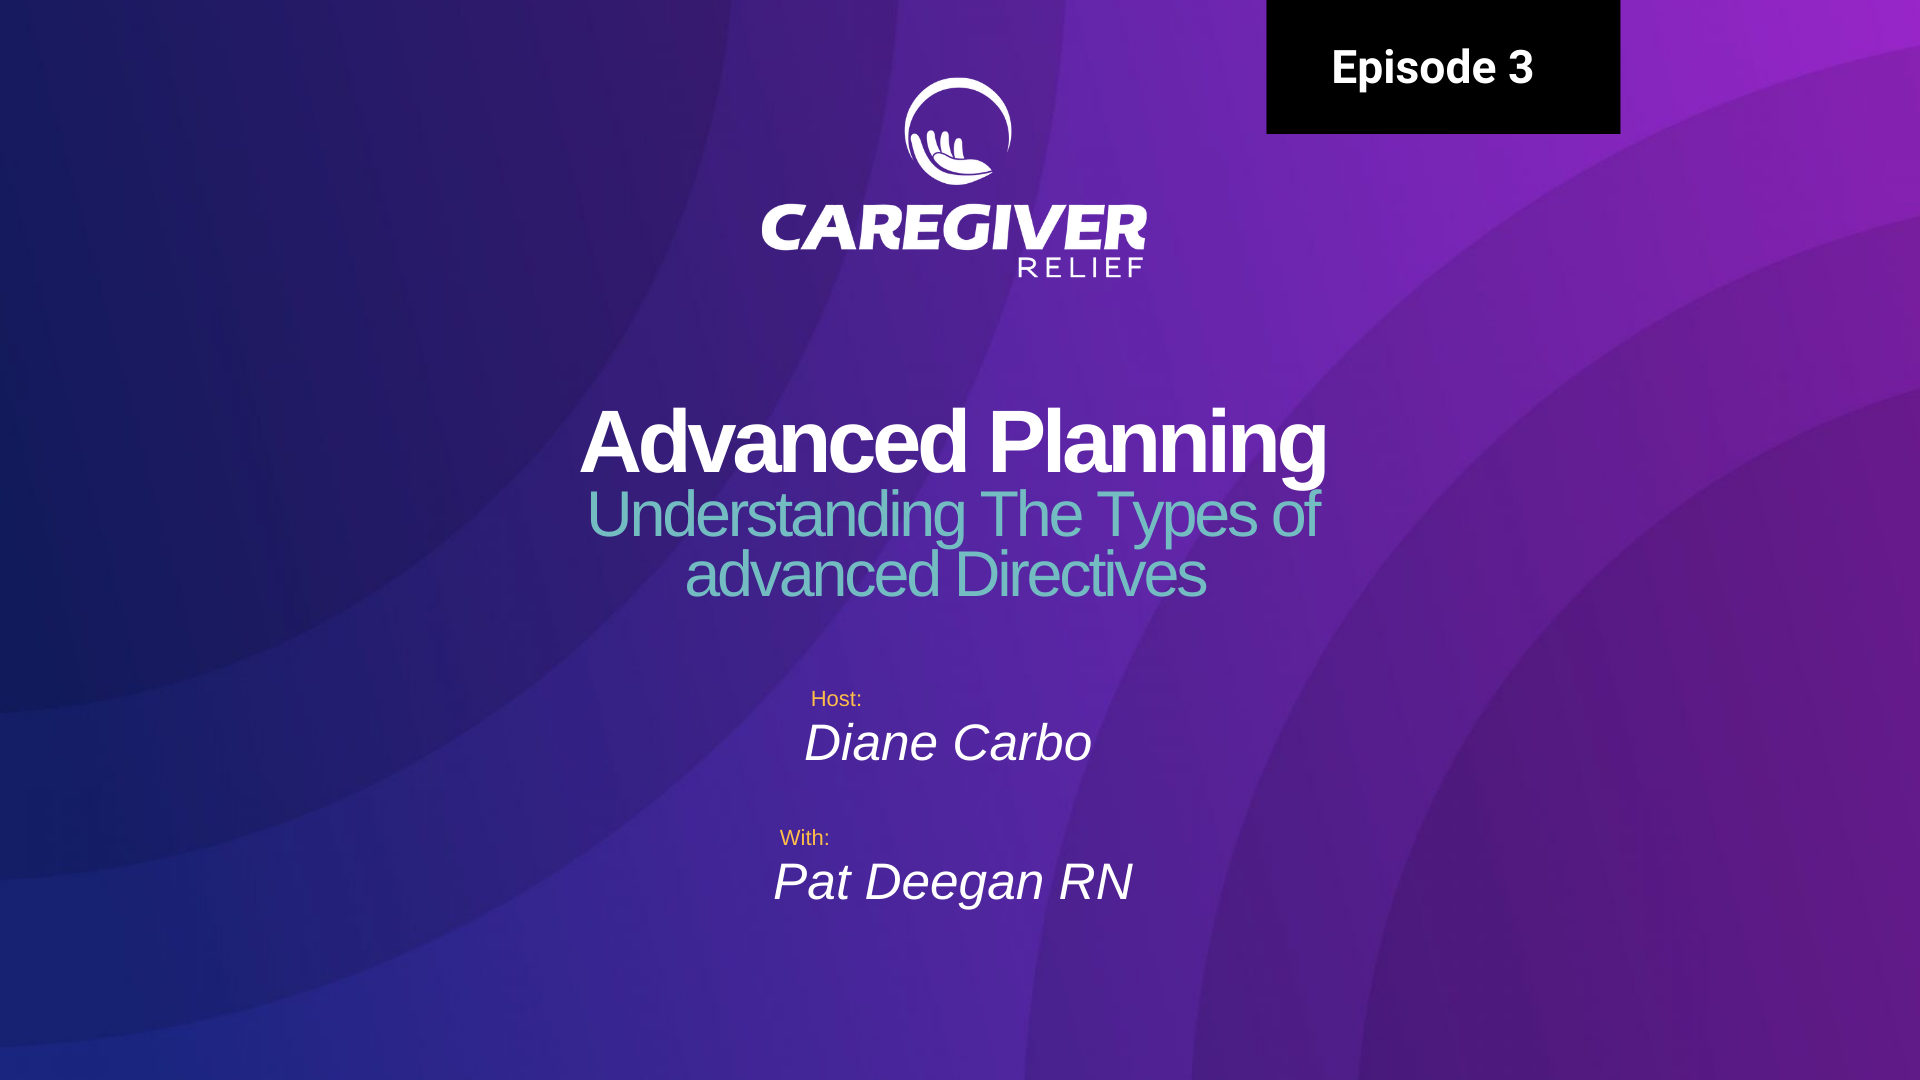 Episode 3 – Pat Deegan RN – Advanced Planning: Understanding Advanced Directives and the Different Types of Advanced Directives